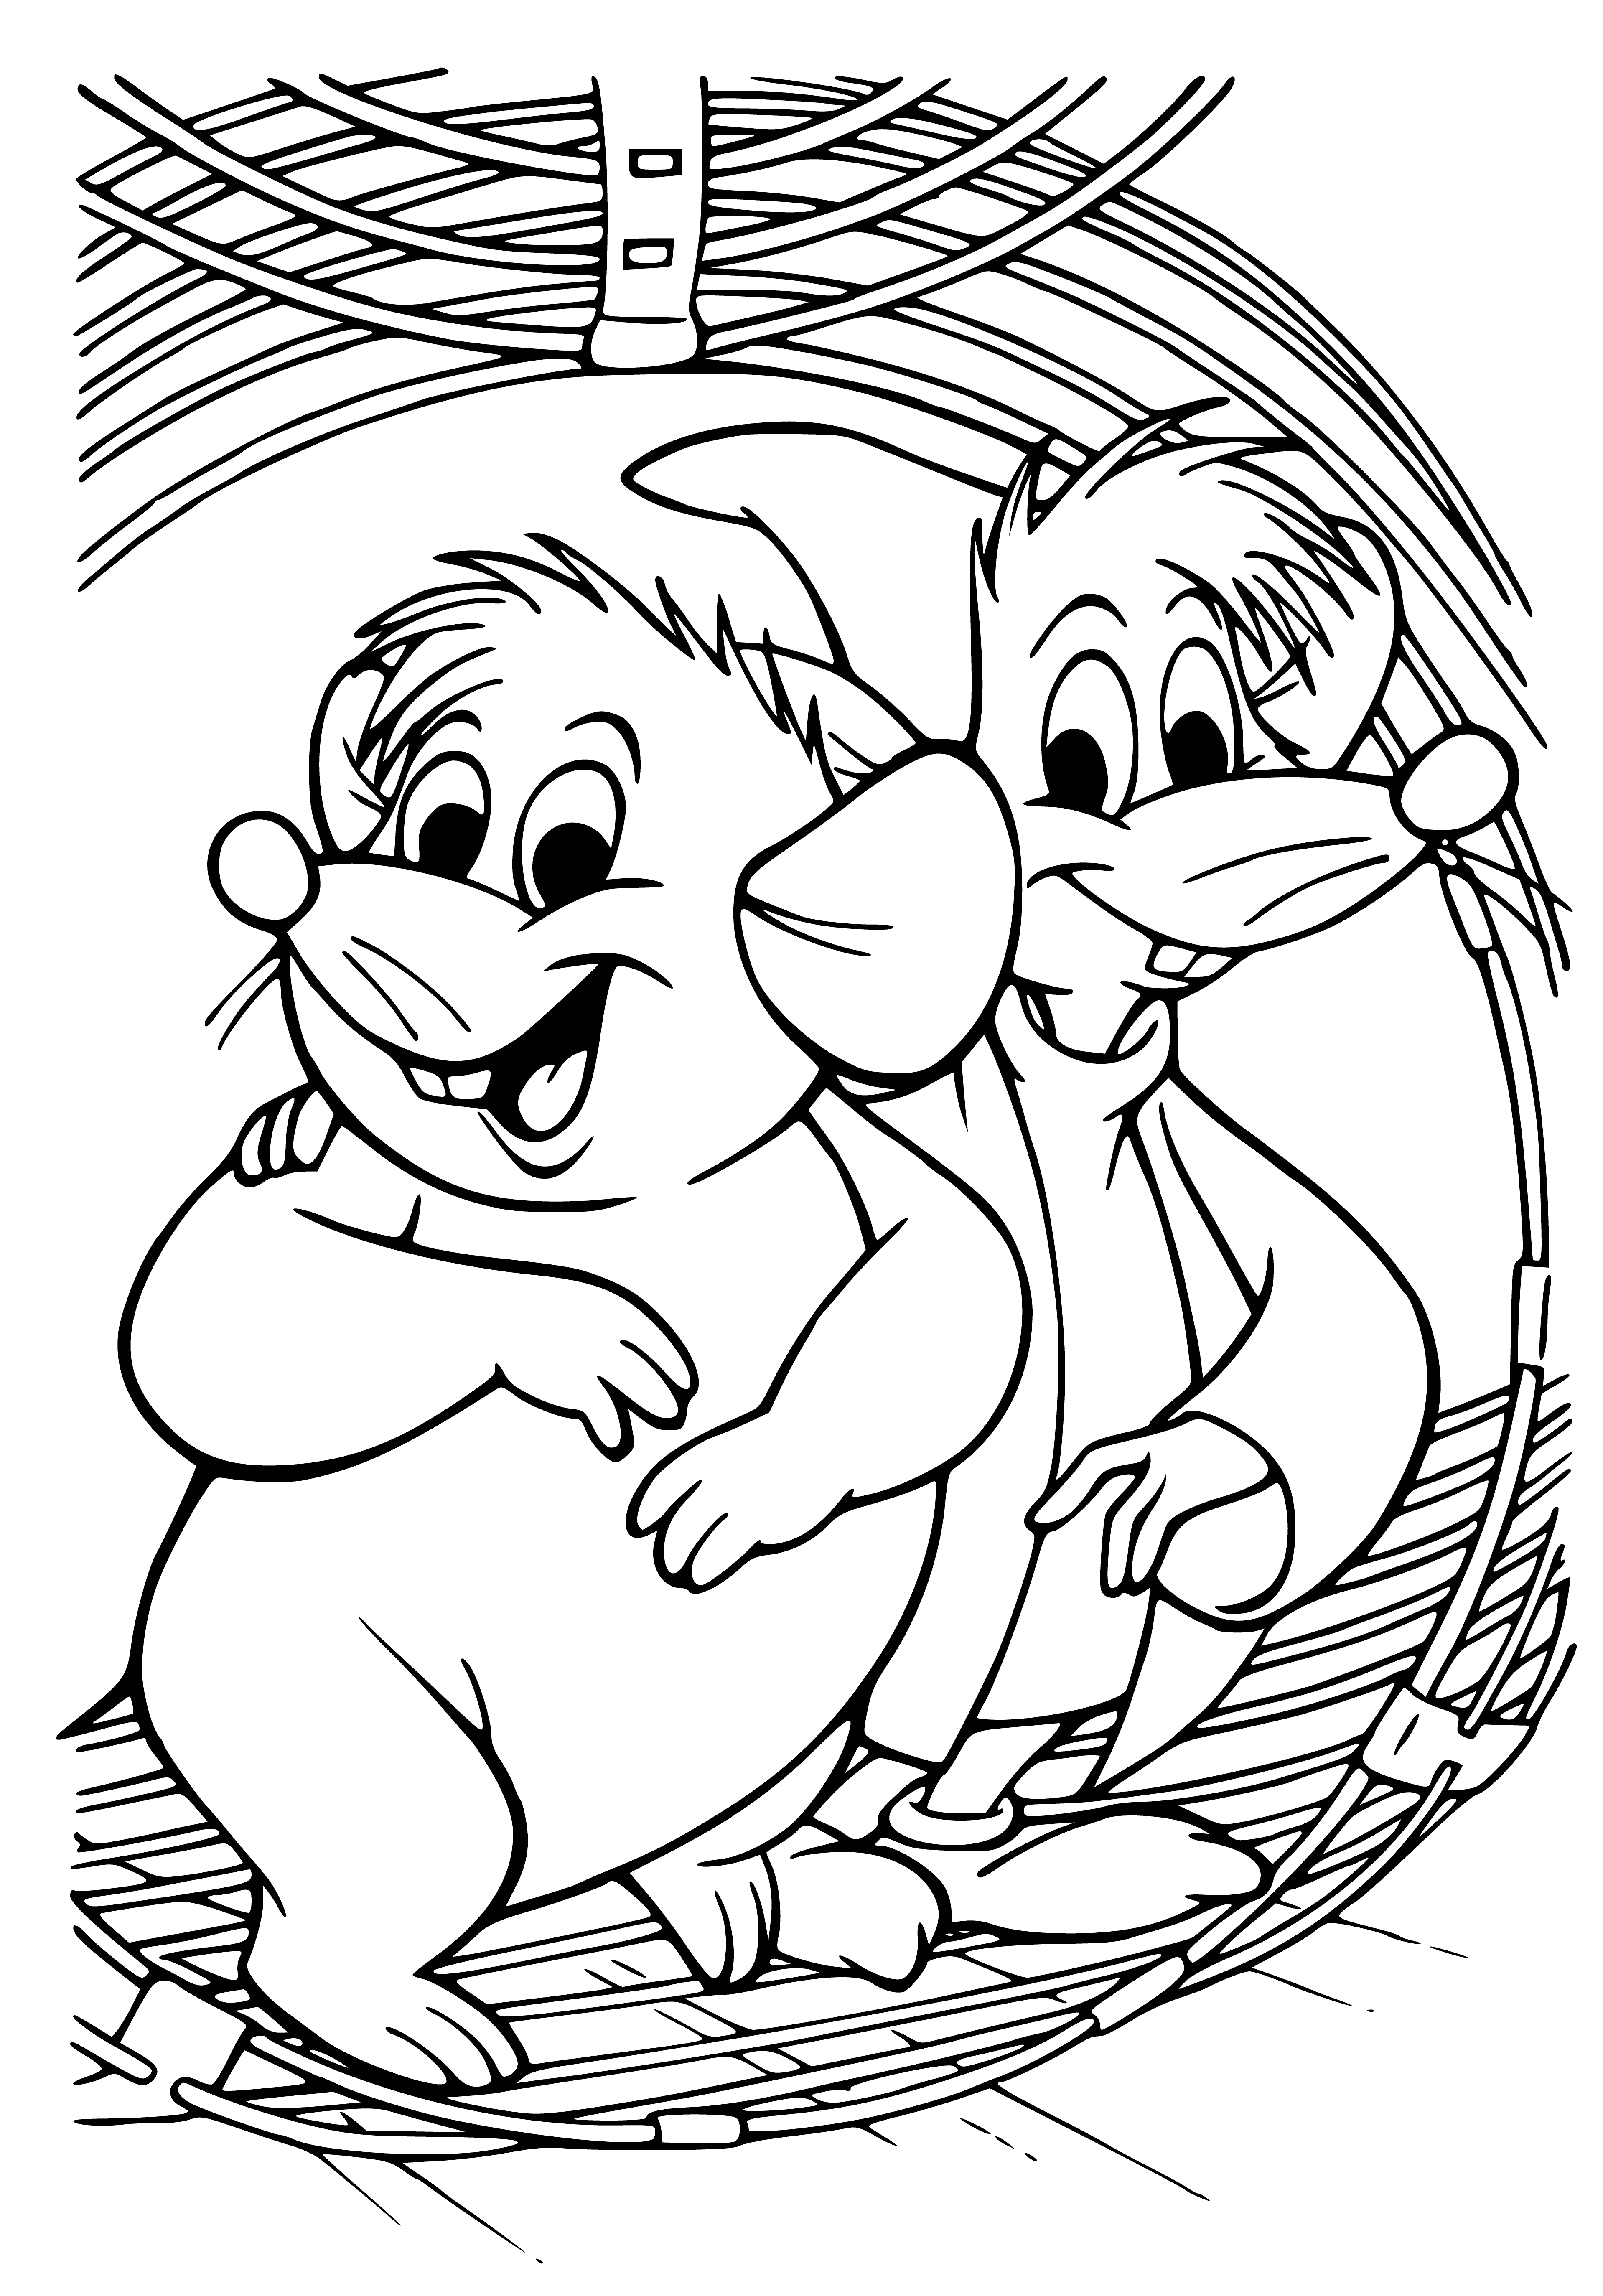 coloring page: Two mice hurry around a wood floor, dragging a pumpkin & a bag of coins- both with large ears and long tails.